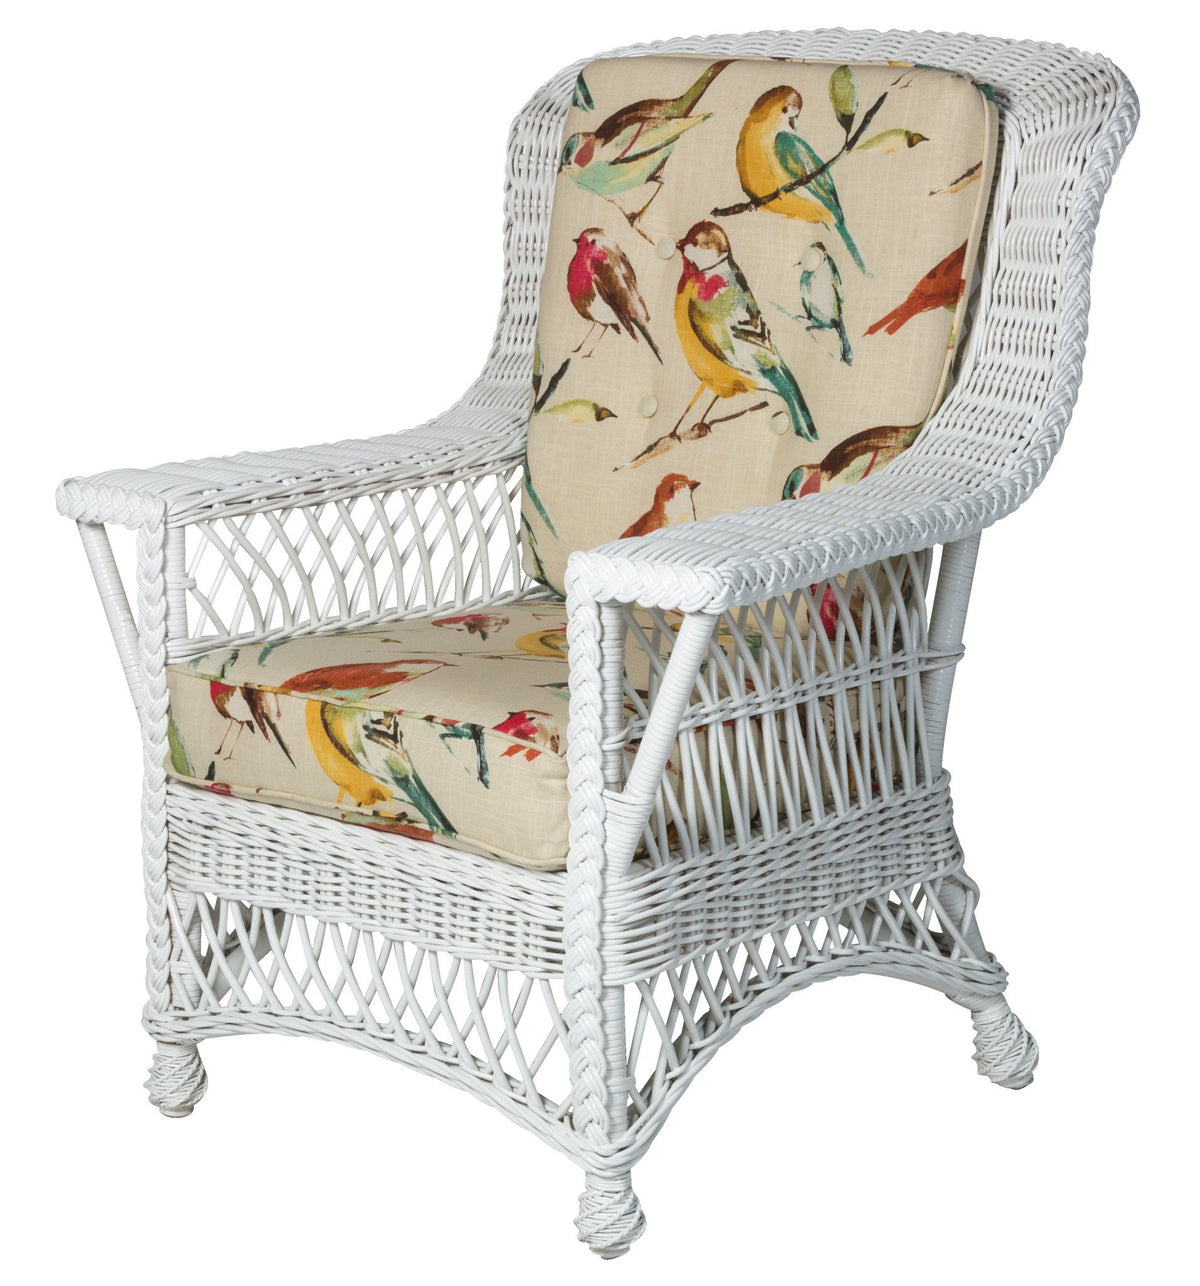 Designer Wicker &amp; Rattan By Tribor Rockport Arm Chair (Rocker Size) by Designer Wicker from Tribor Chair - Rattan Imports